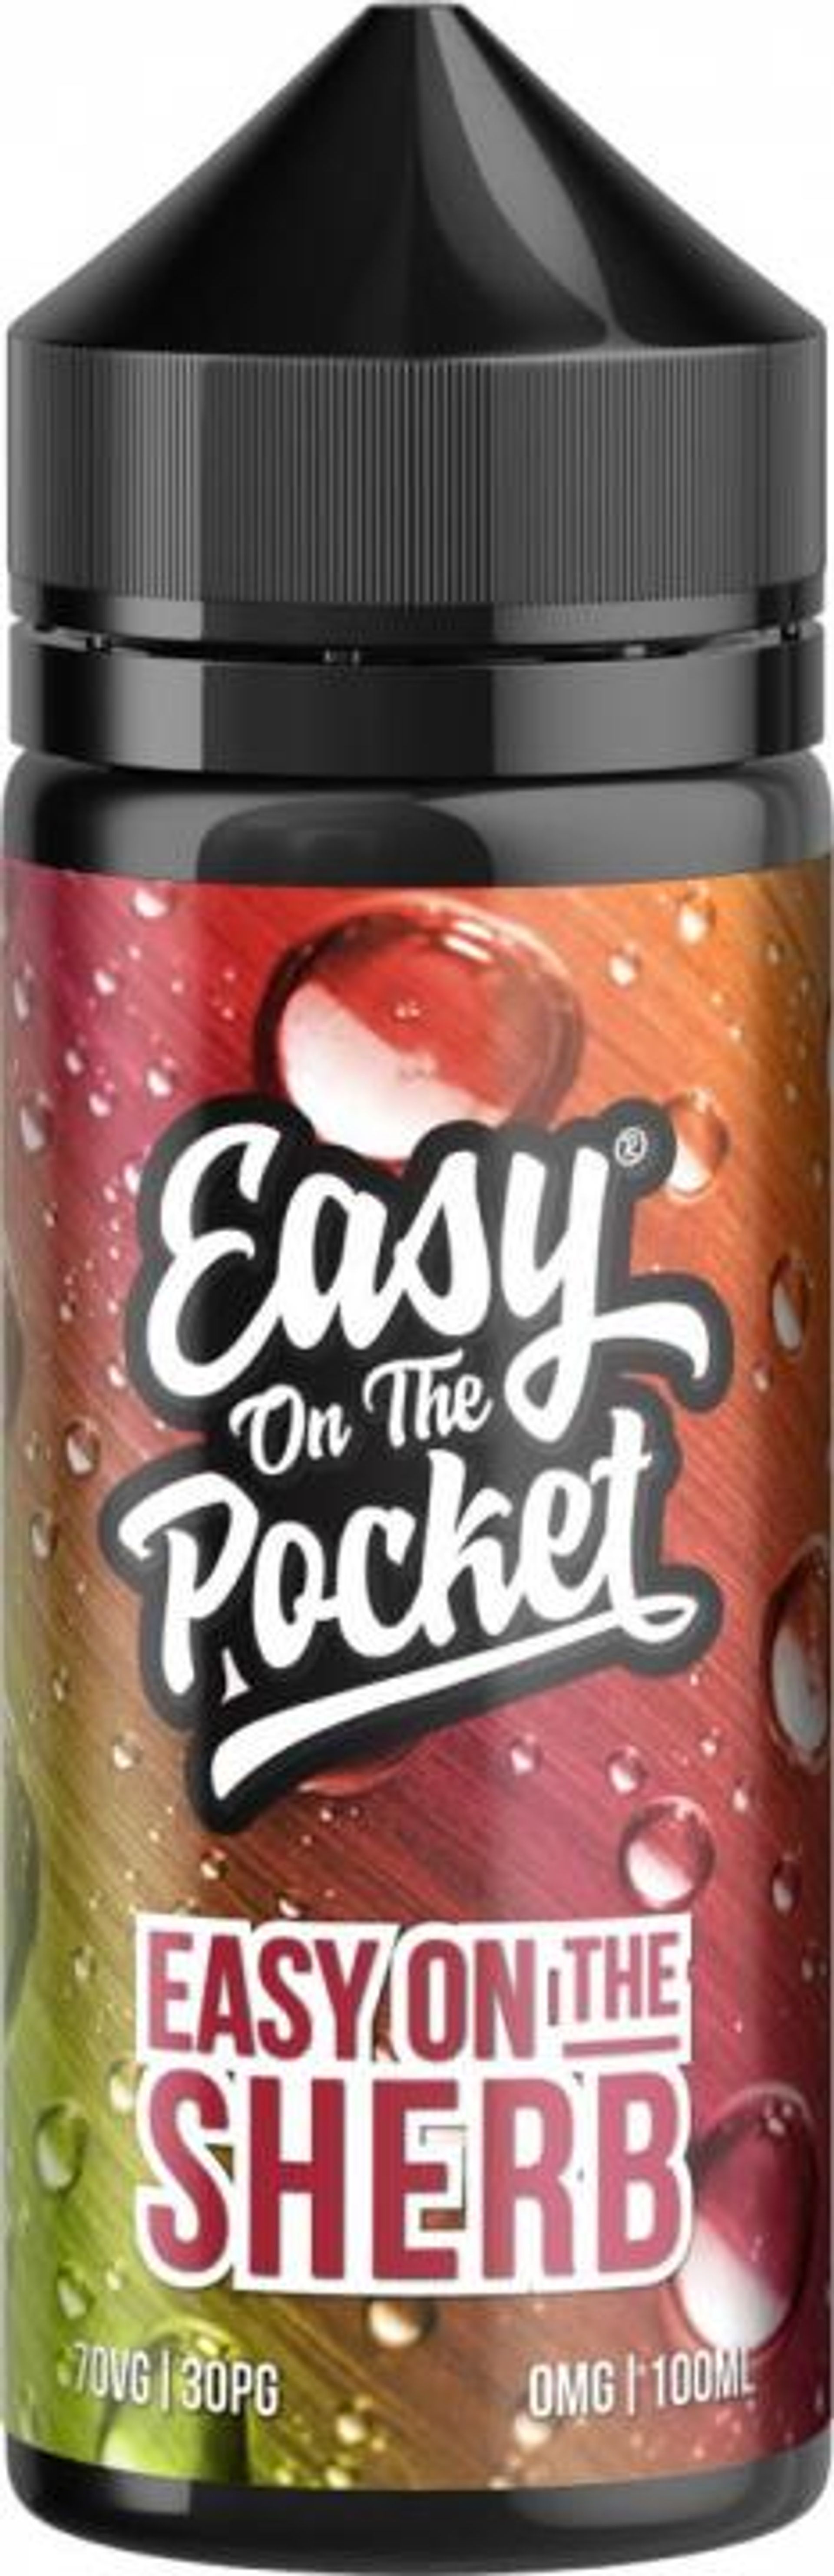 Image of Easy On The Sherb by Easy On The Pocket